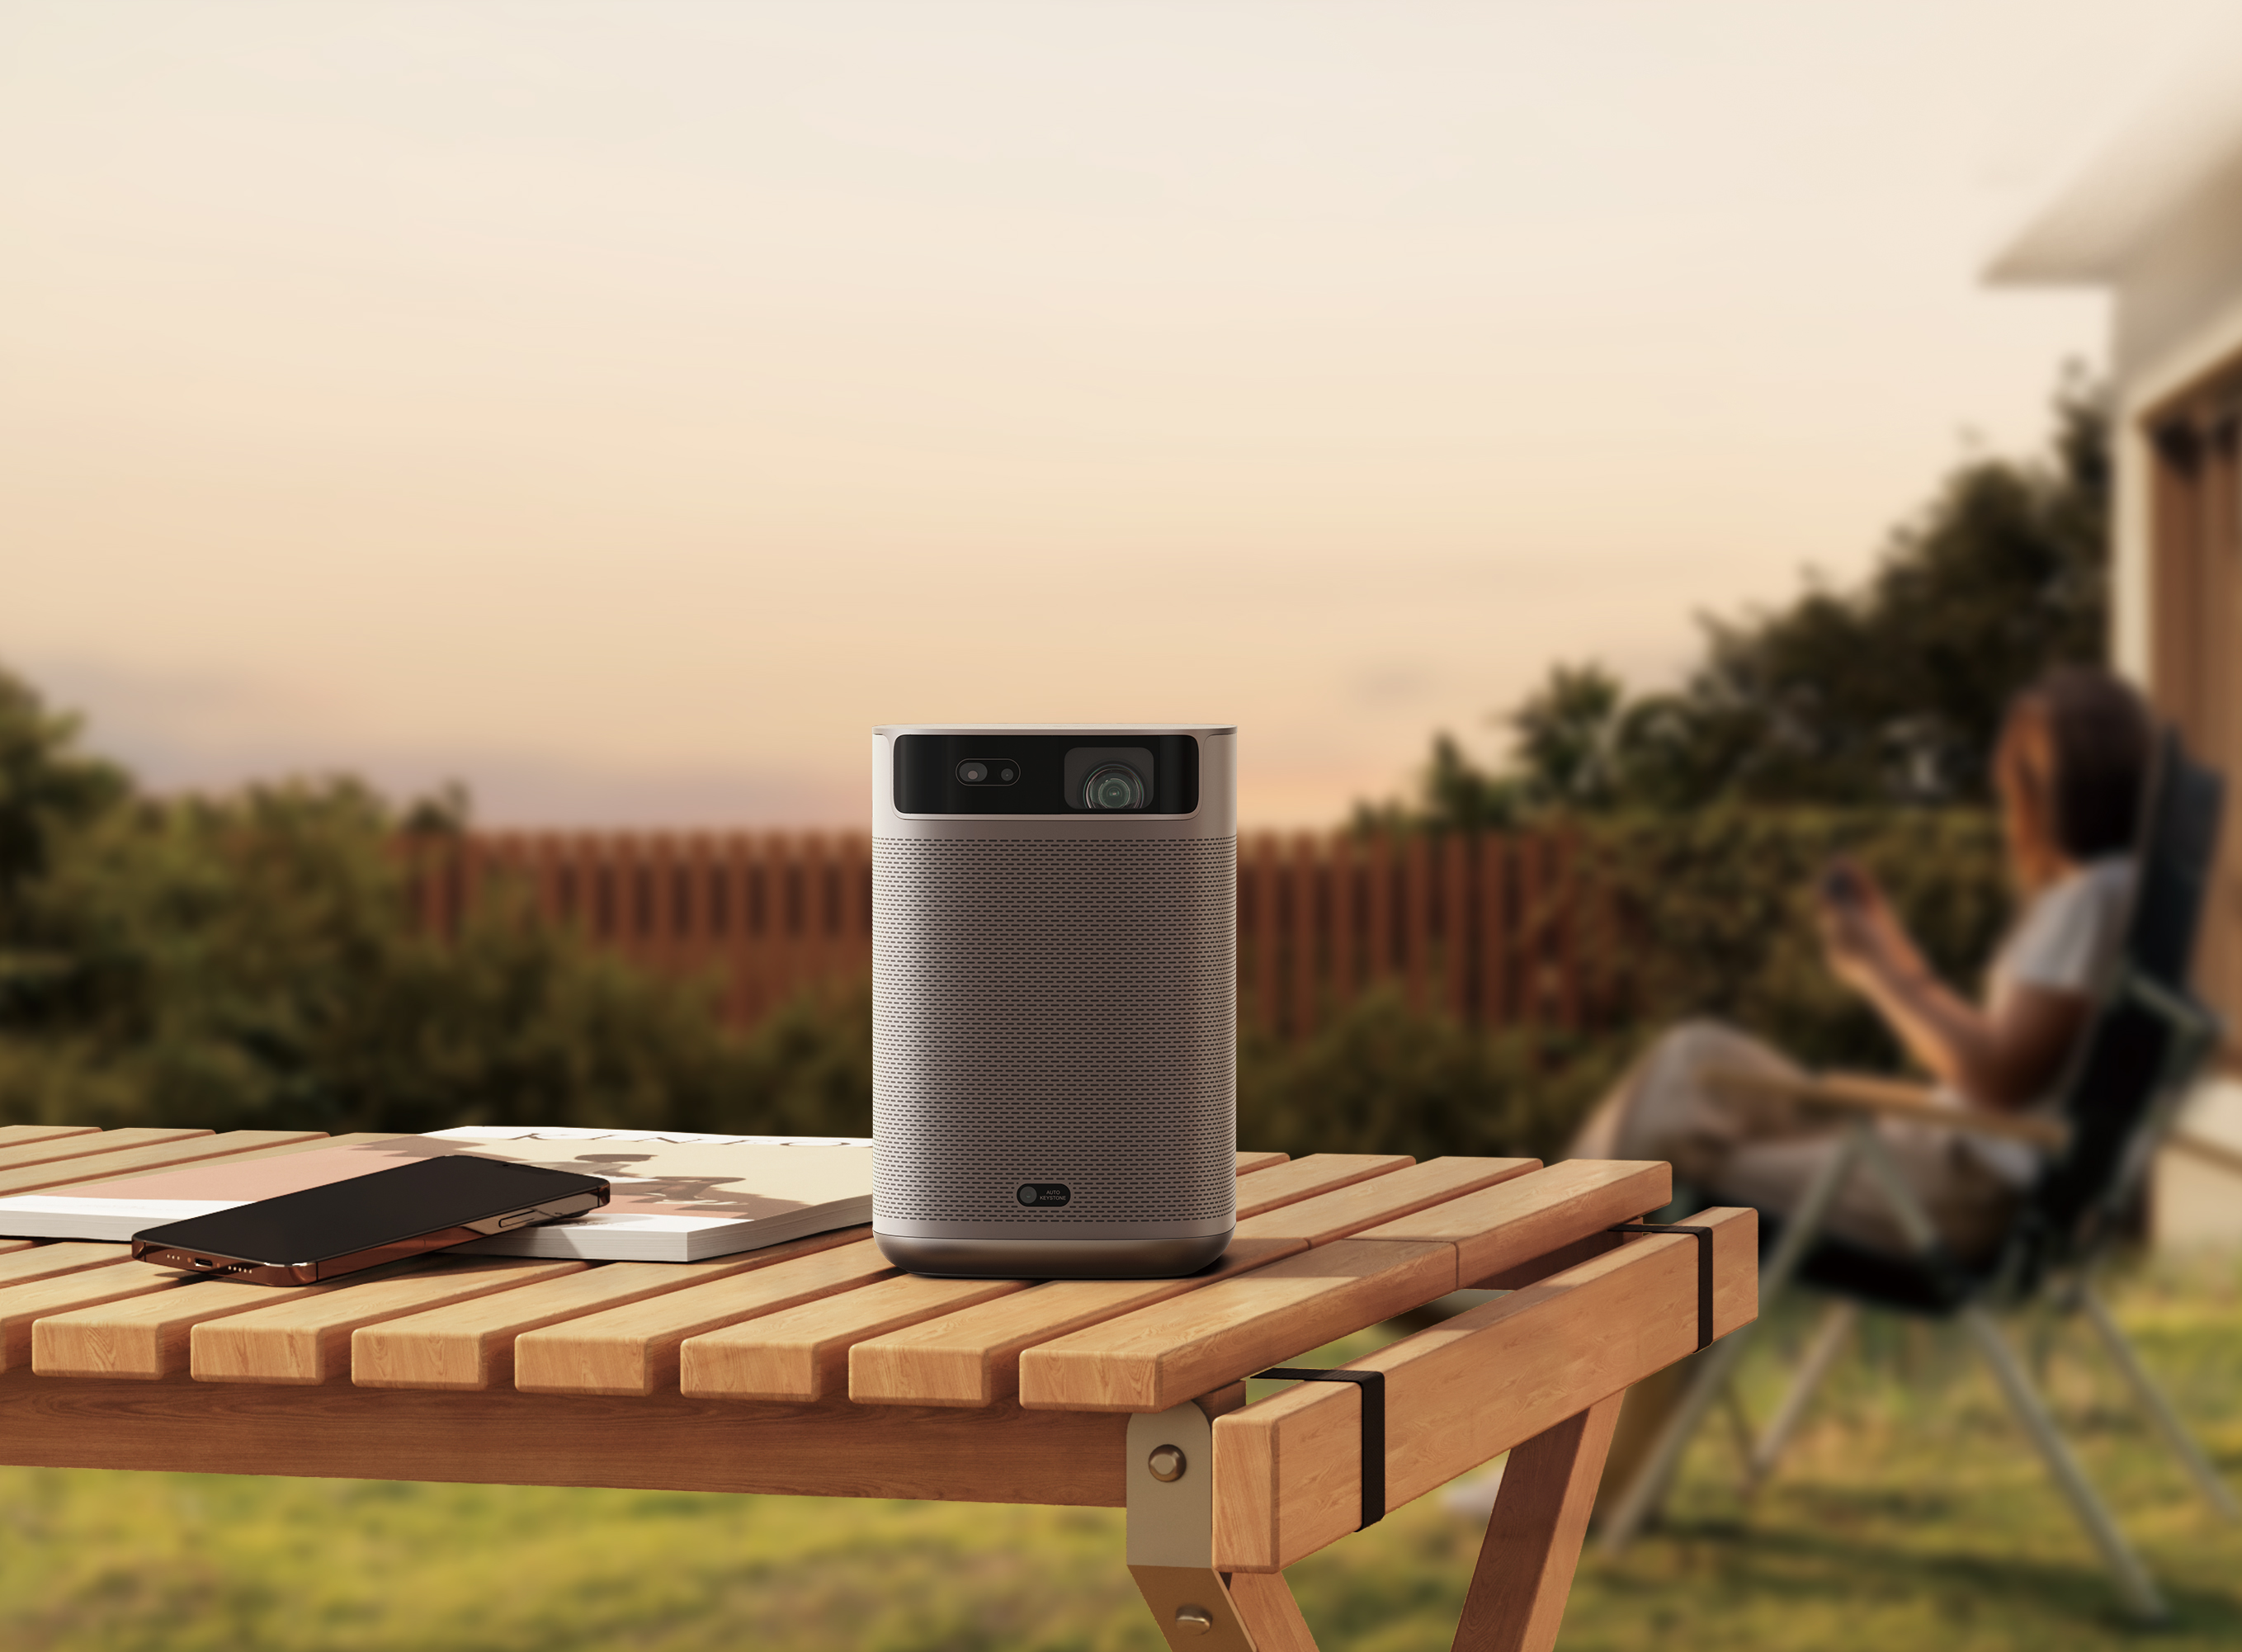 Xgimi announces Mogo 2 Pro portable projector with seamless auto-focus and  auto-keystone -  News